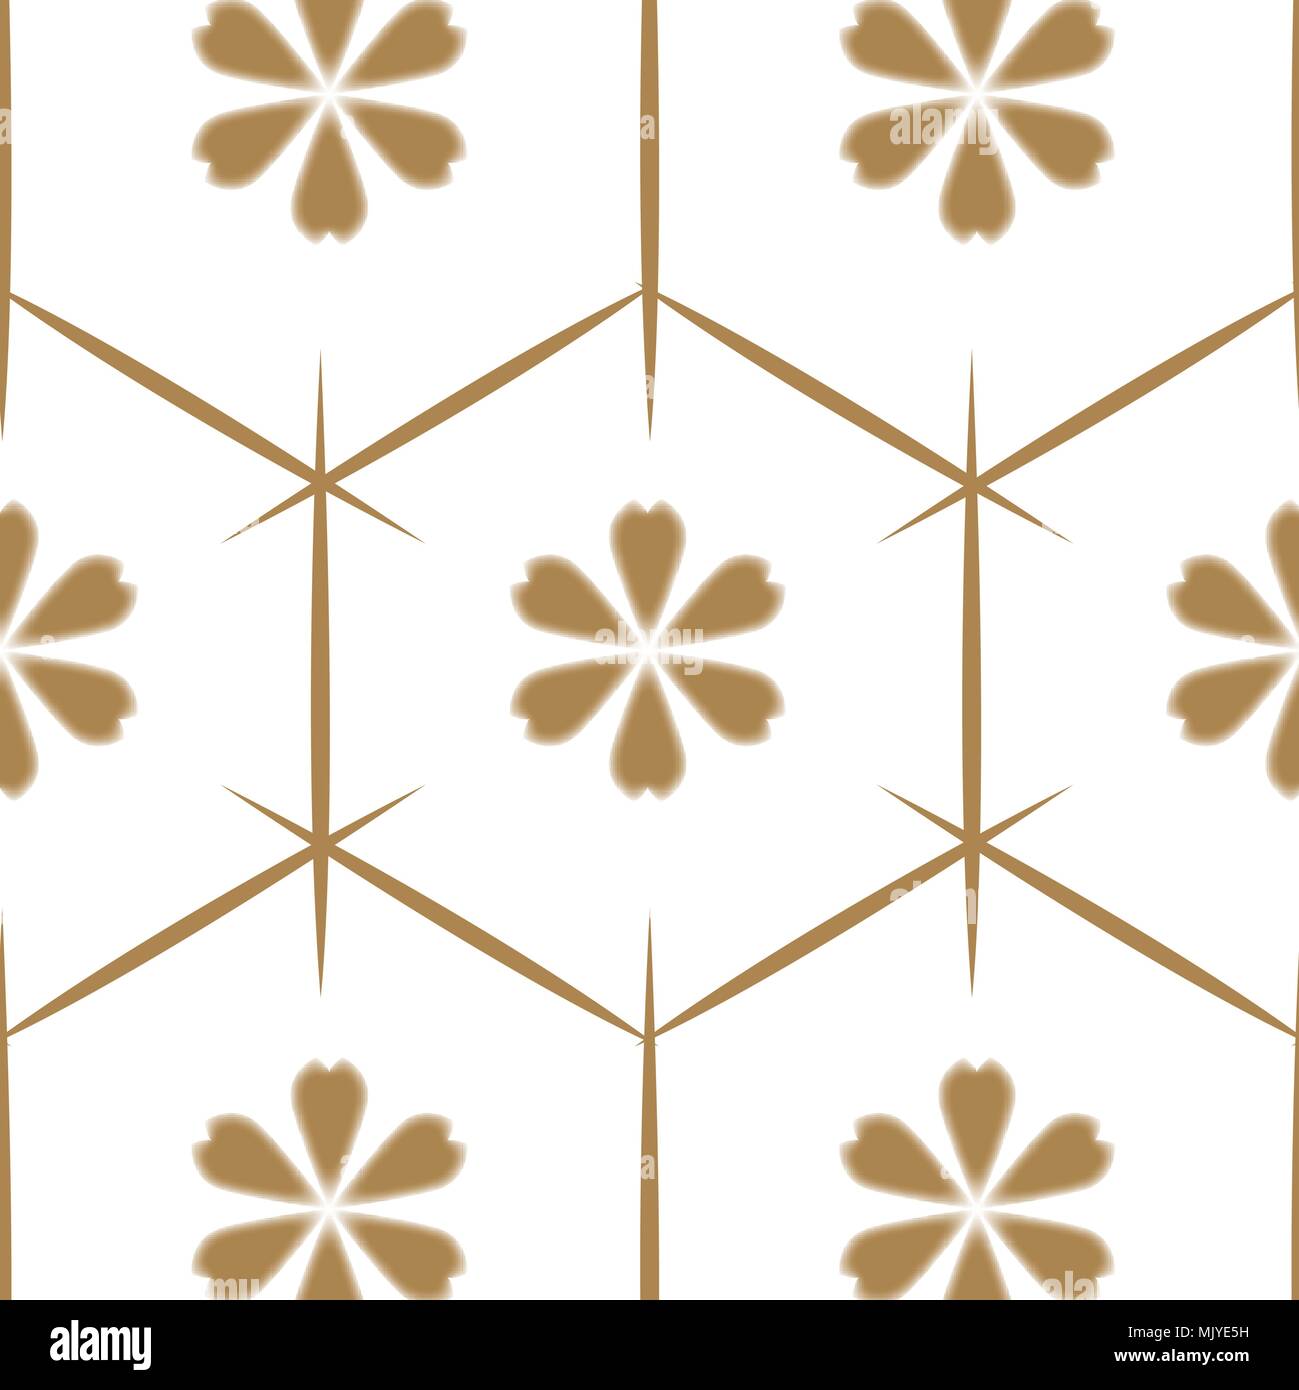 Japanese pattern vector. Gold floral background in tie and dyeing style for cover page design, template, backdrop. Stock Vector